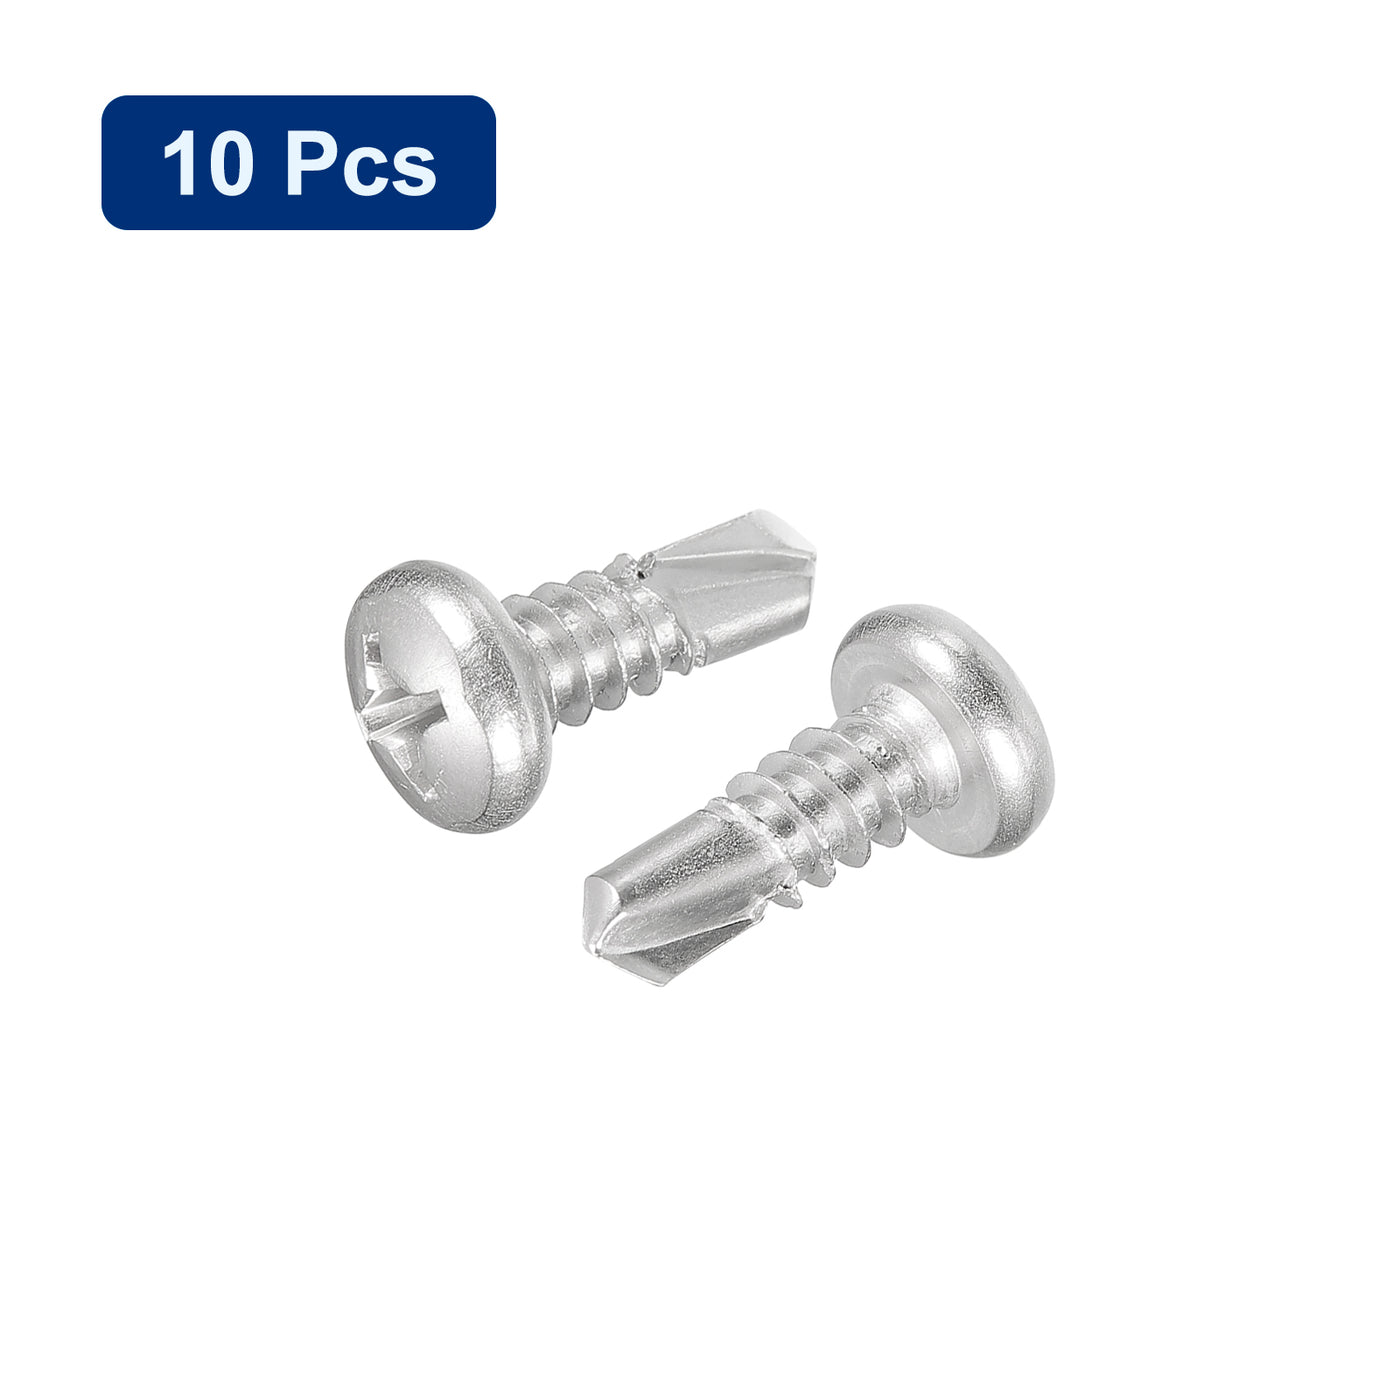 uxcell Uxcell #14 x 3/4" Self Drilling Screws, 10pcs Phillips Pan Head Self Tapping Screws